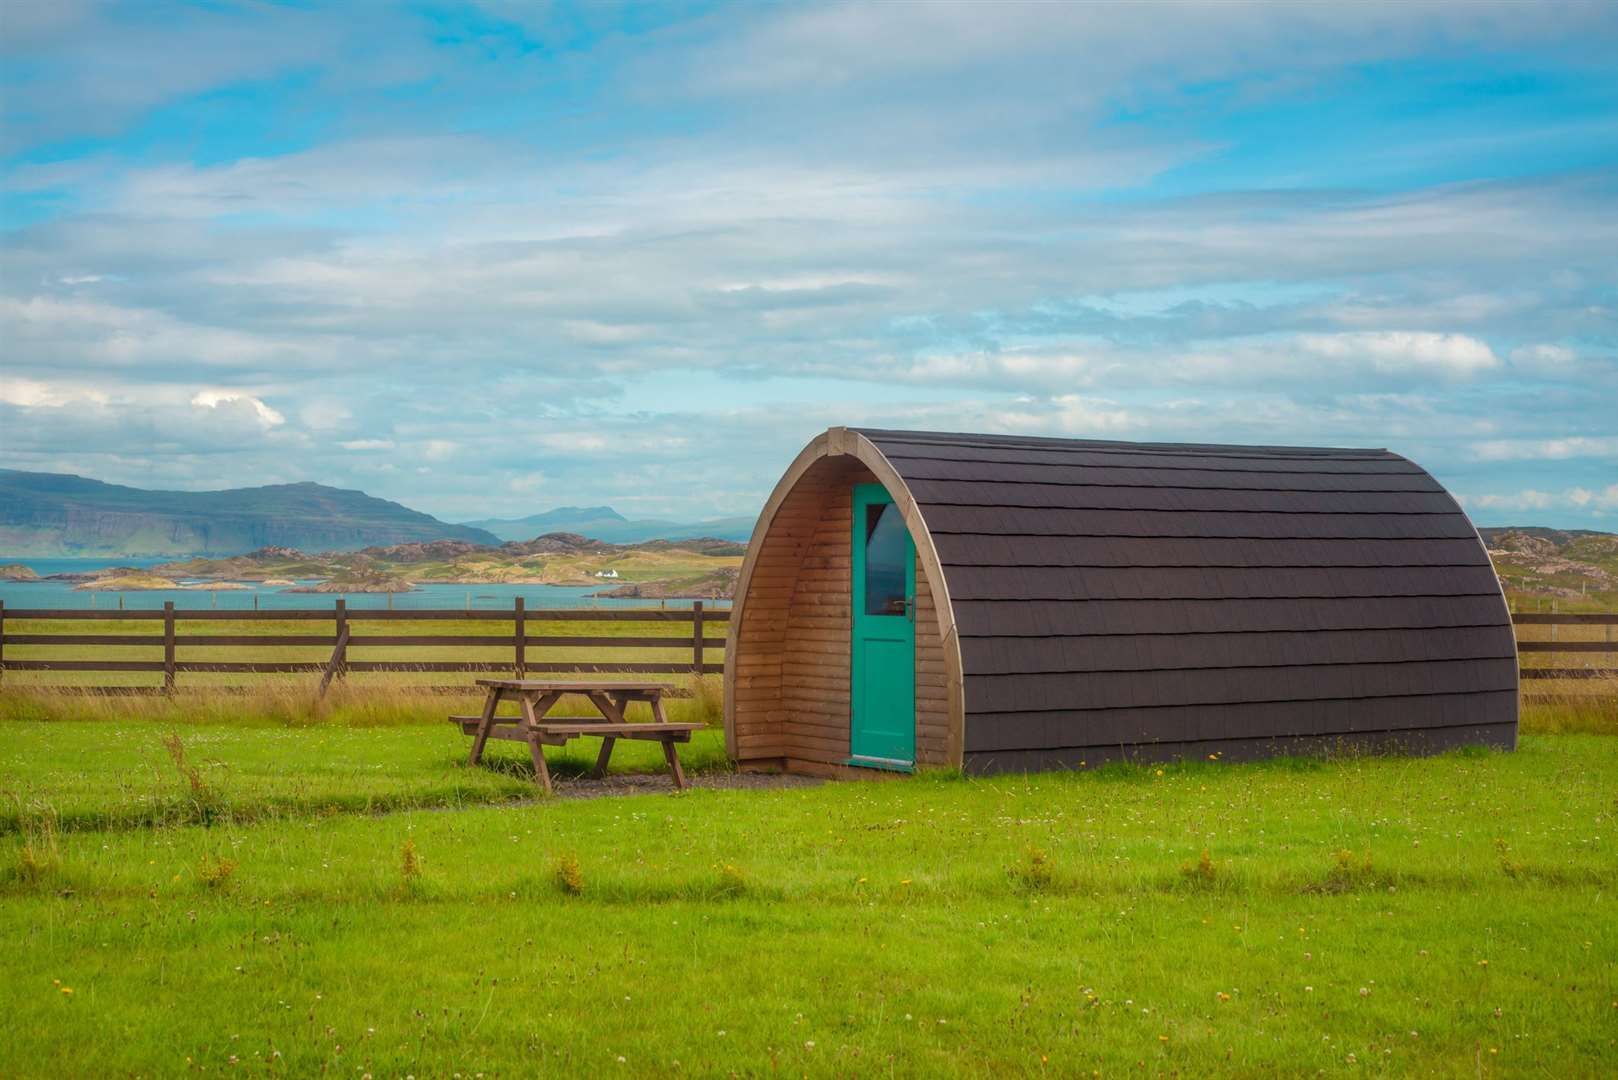 Camping pods have become a popular option for some farm businesses as they look to diversify.